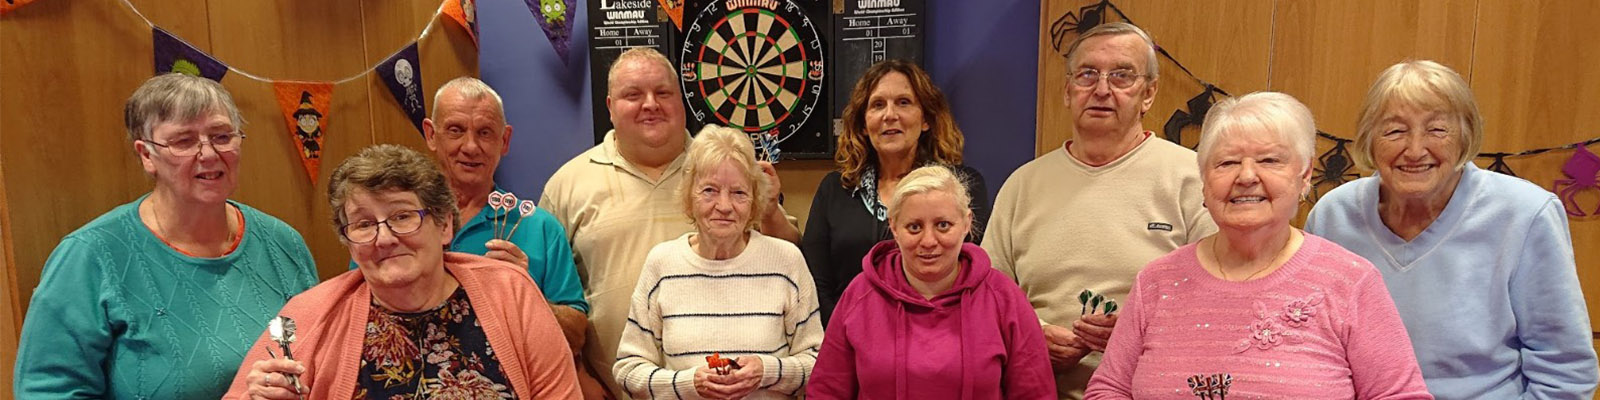 10 residents in front of a dart board